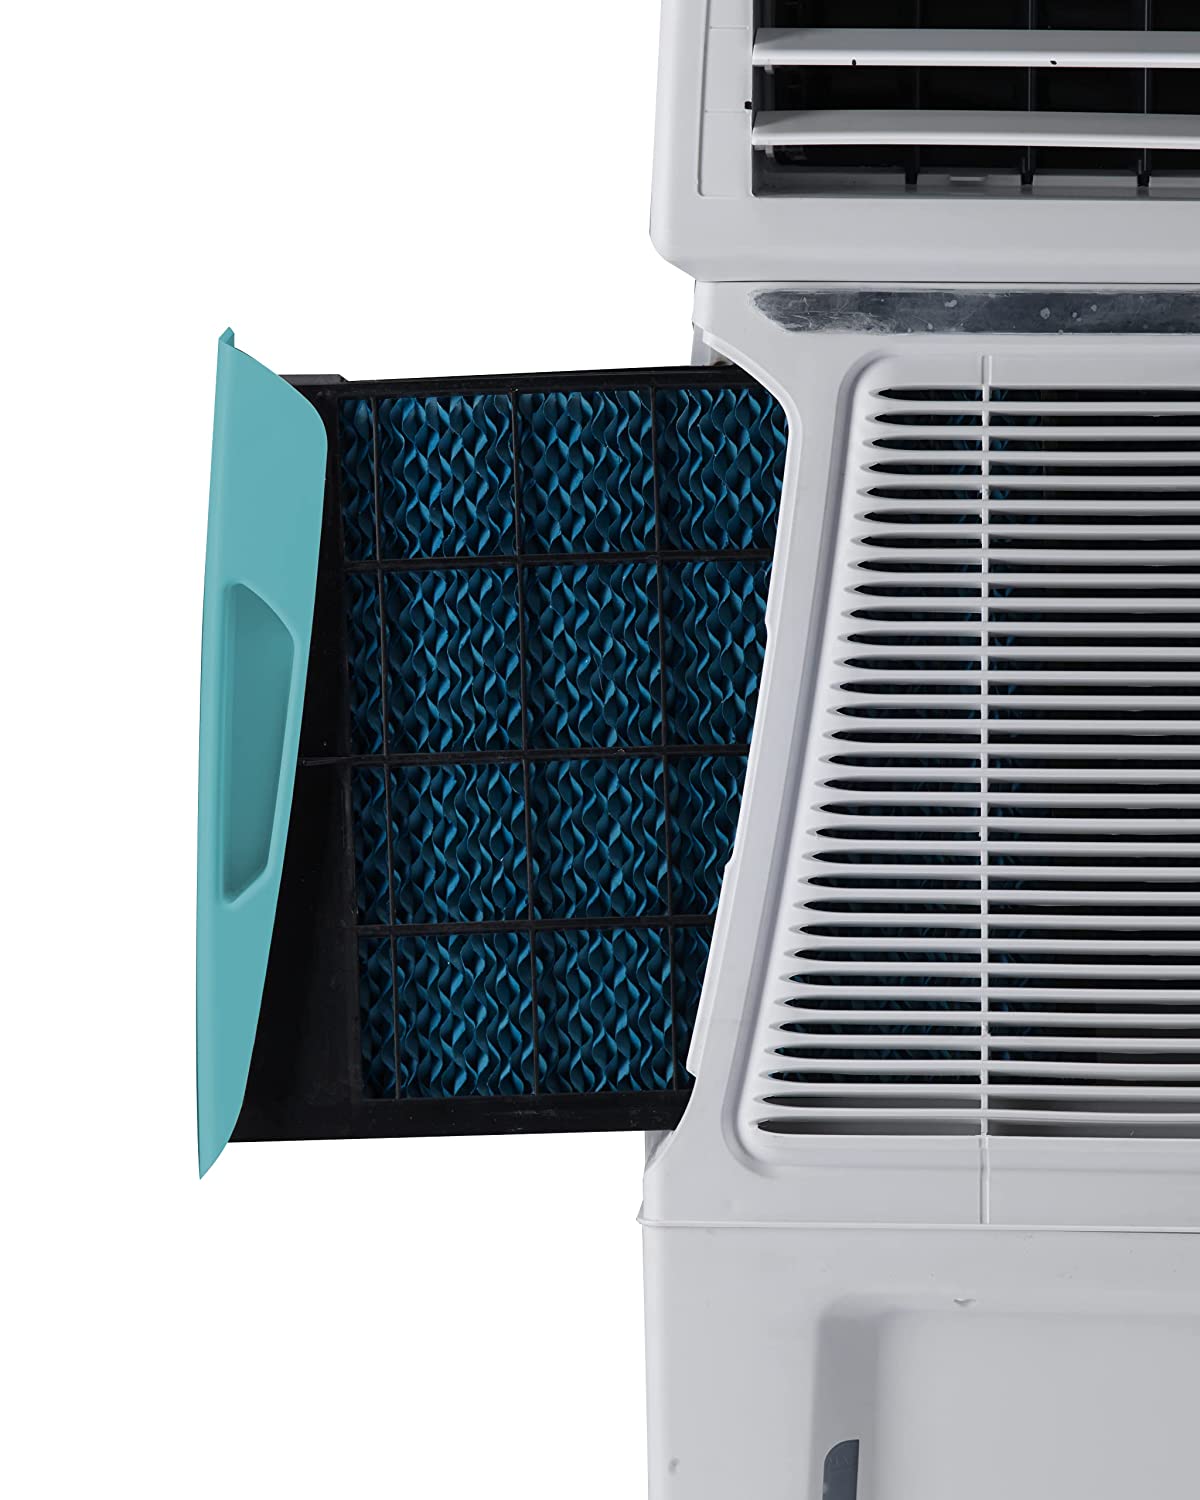 SYMPHONY AIR COOLER TOUCH-80